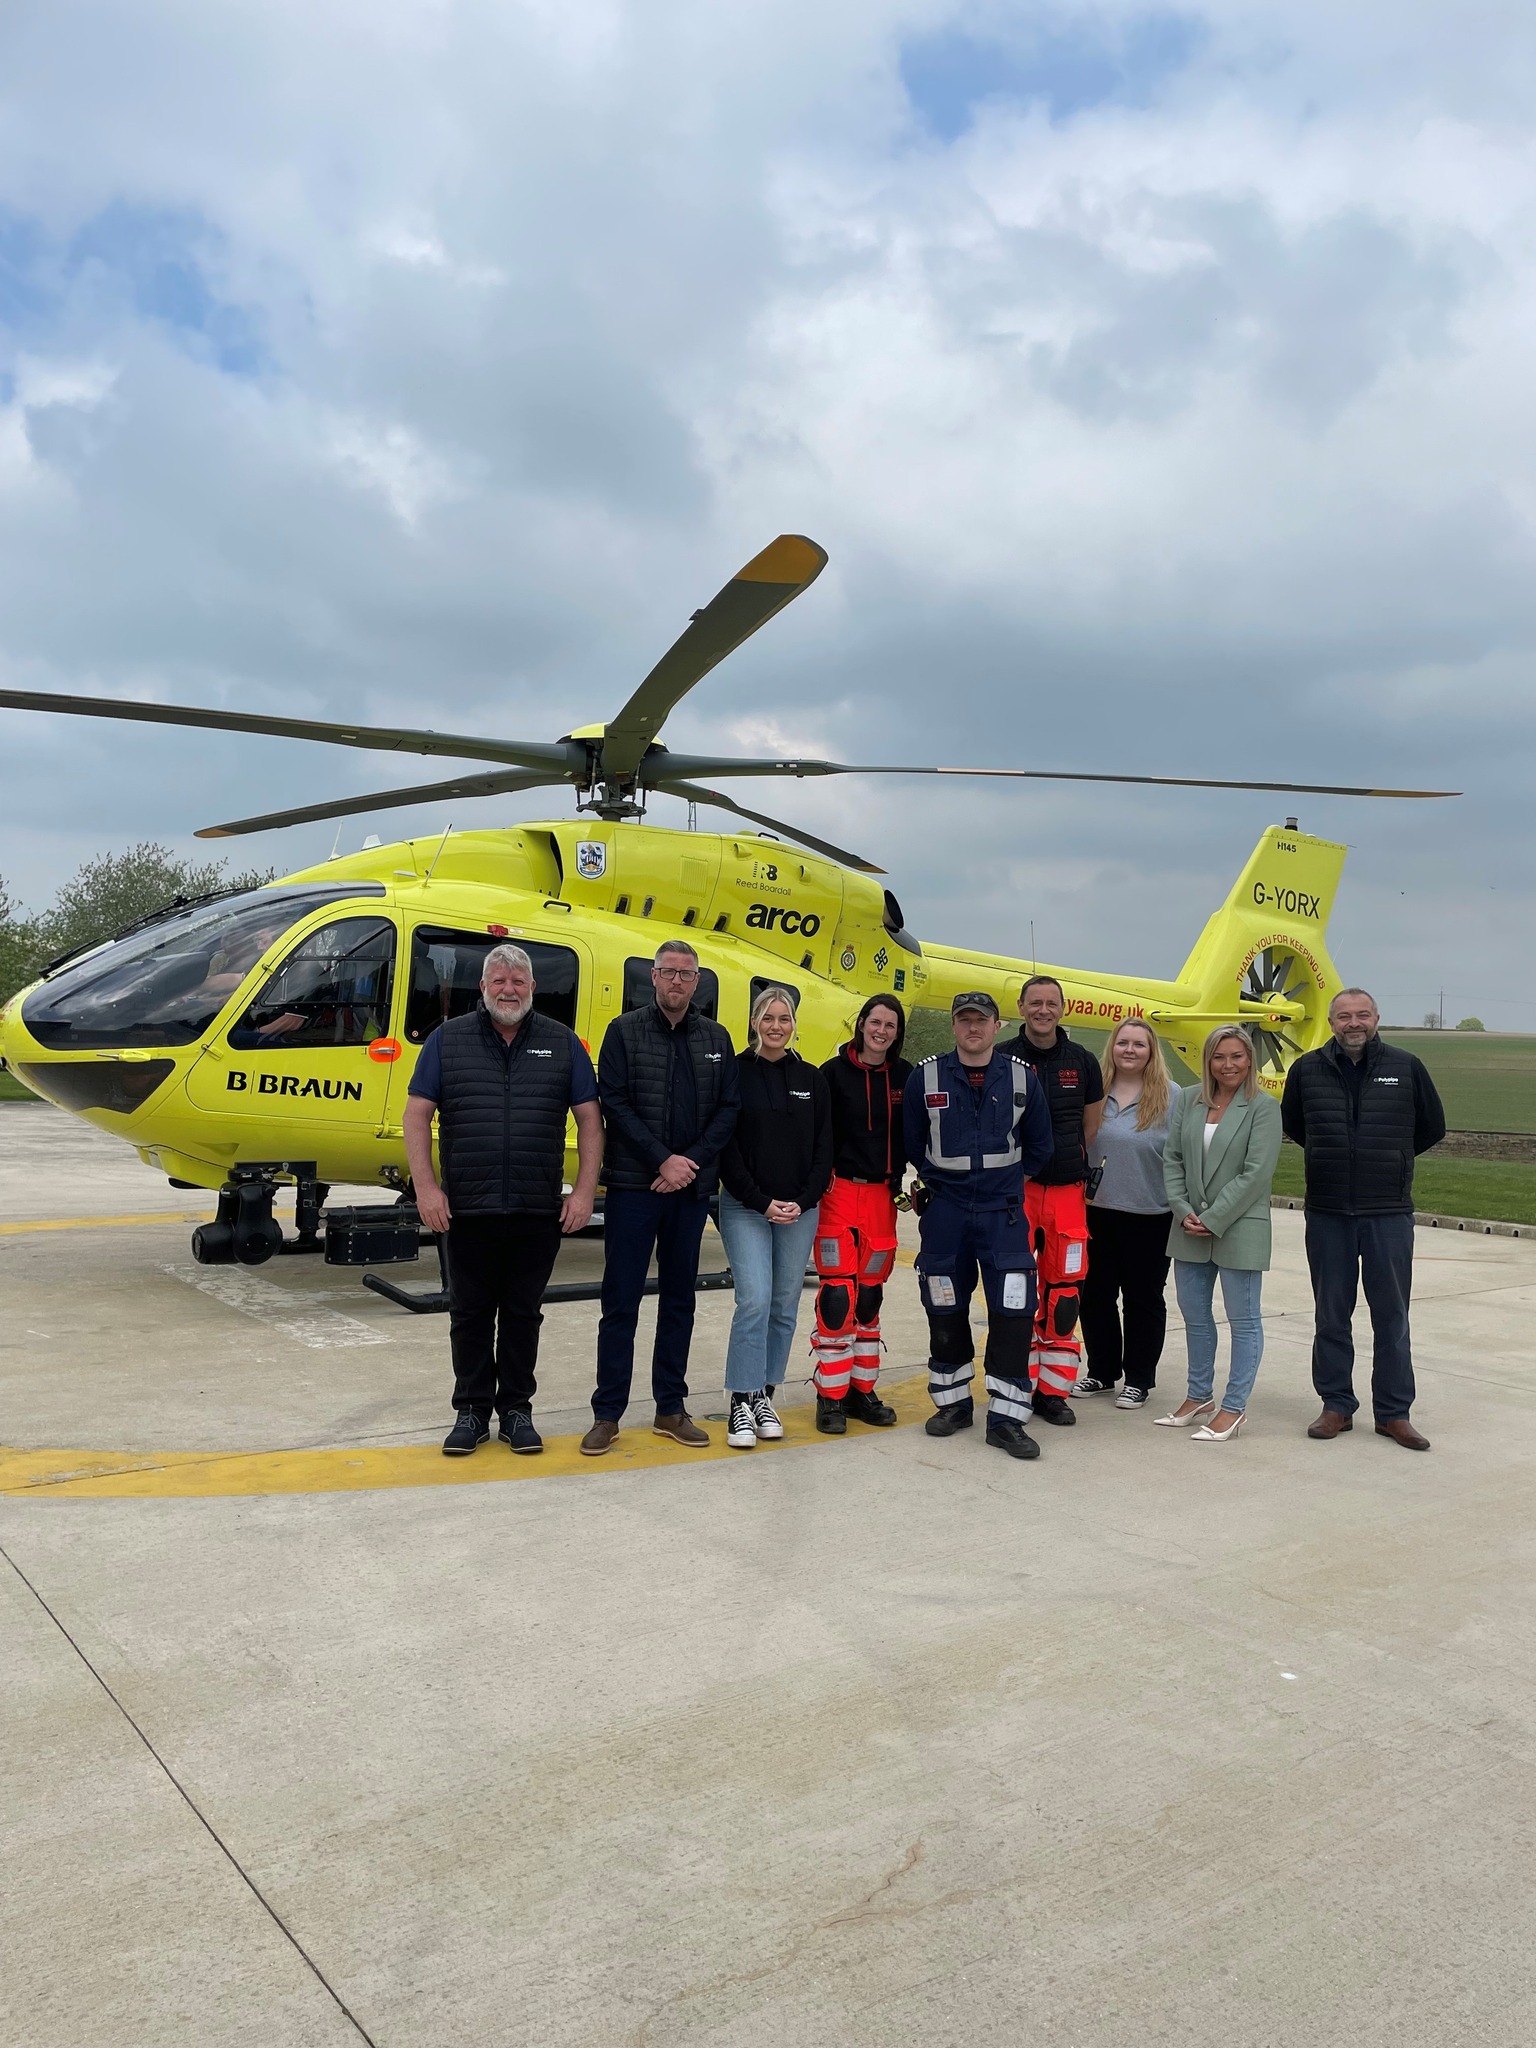 The team from Polypipe Building Products stand in front of a yellow helicopter which belongs to the charity, Yorkshire Air Ambulance. Stood with our colleagues are the members of the Yorkshire Air Ambulance team who were on call to incidents that day.